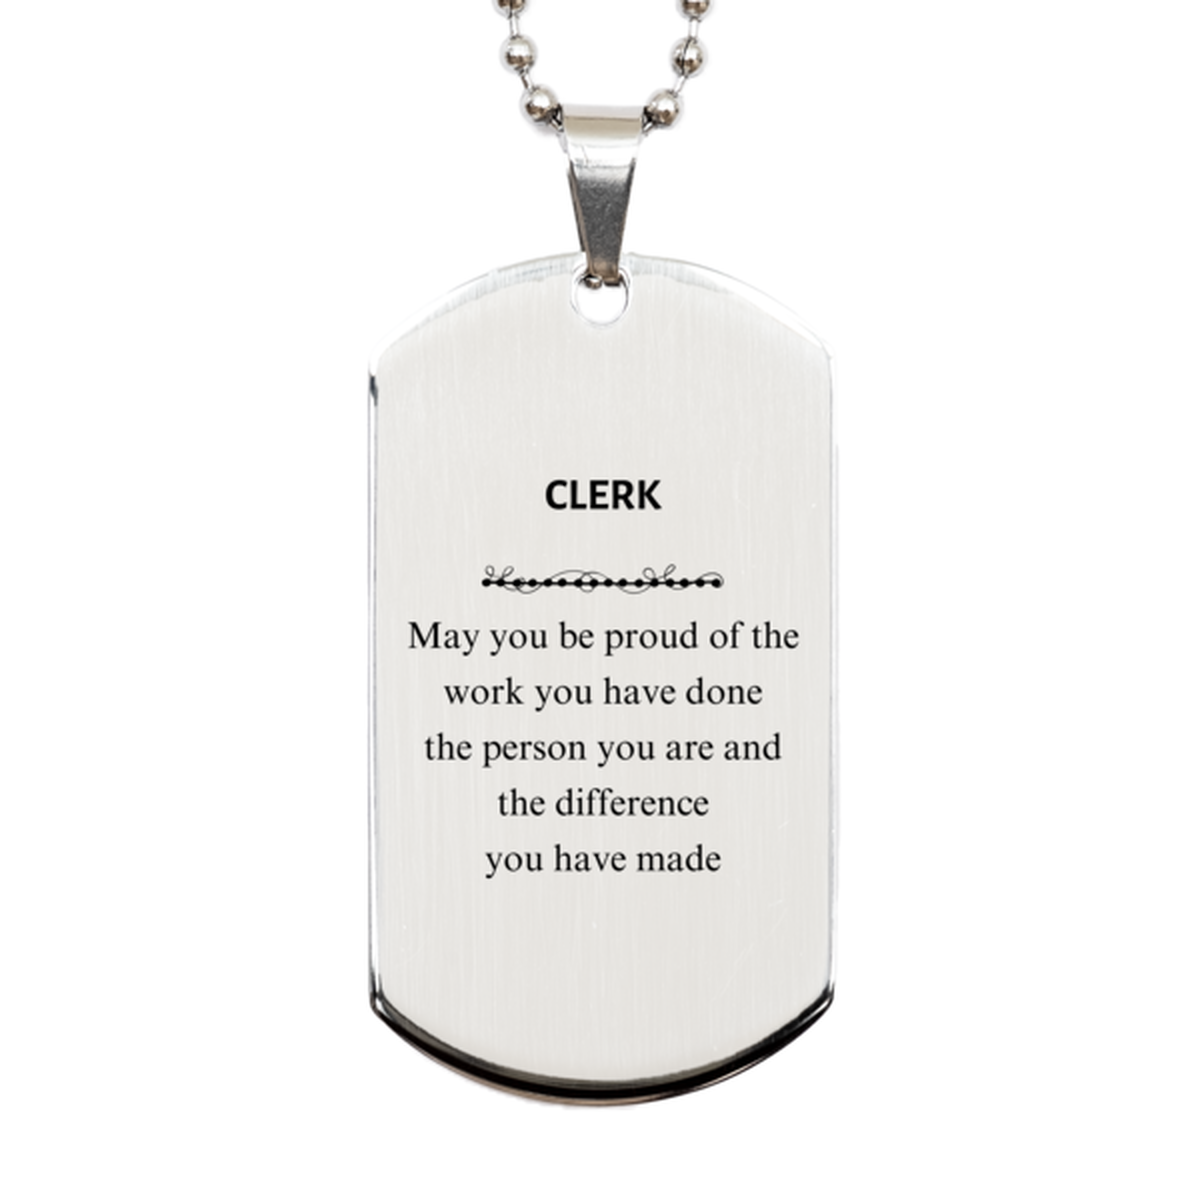 Clerk May you be proud of the work you have done, Retirement Clerk Silver Dog Tag for Colleague Appreciation Gifts Amazing for Clerk